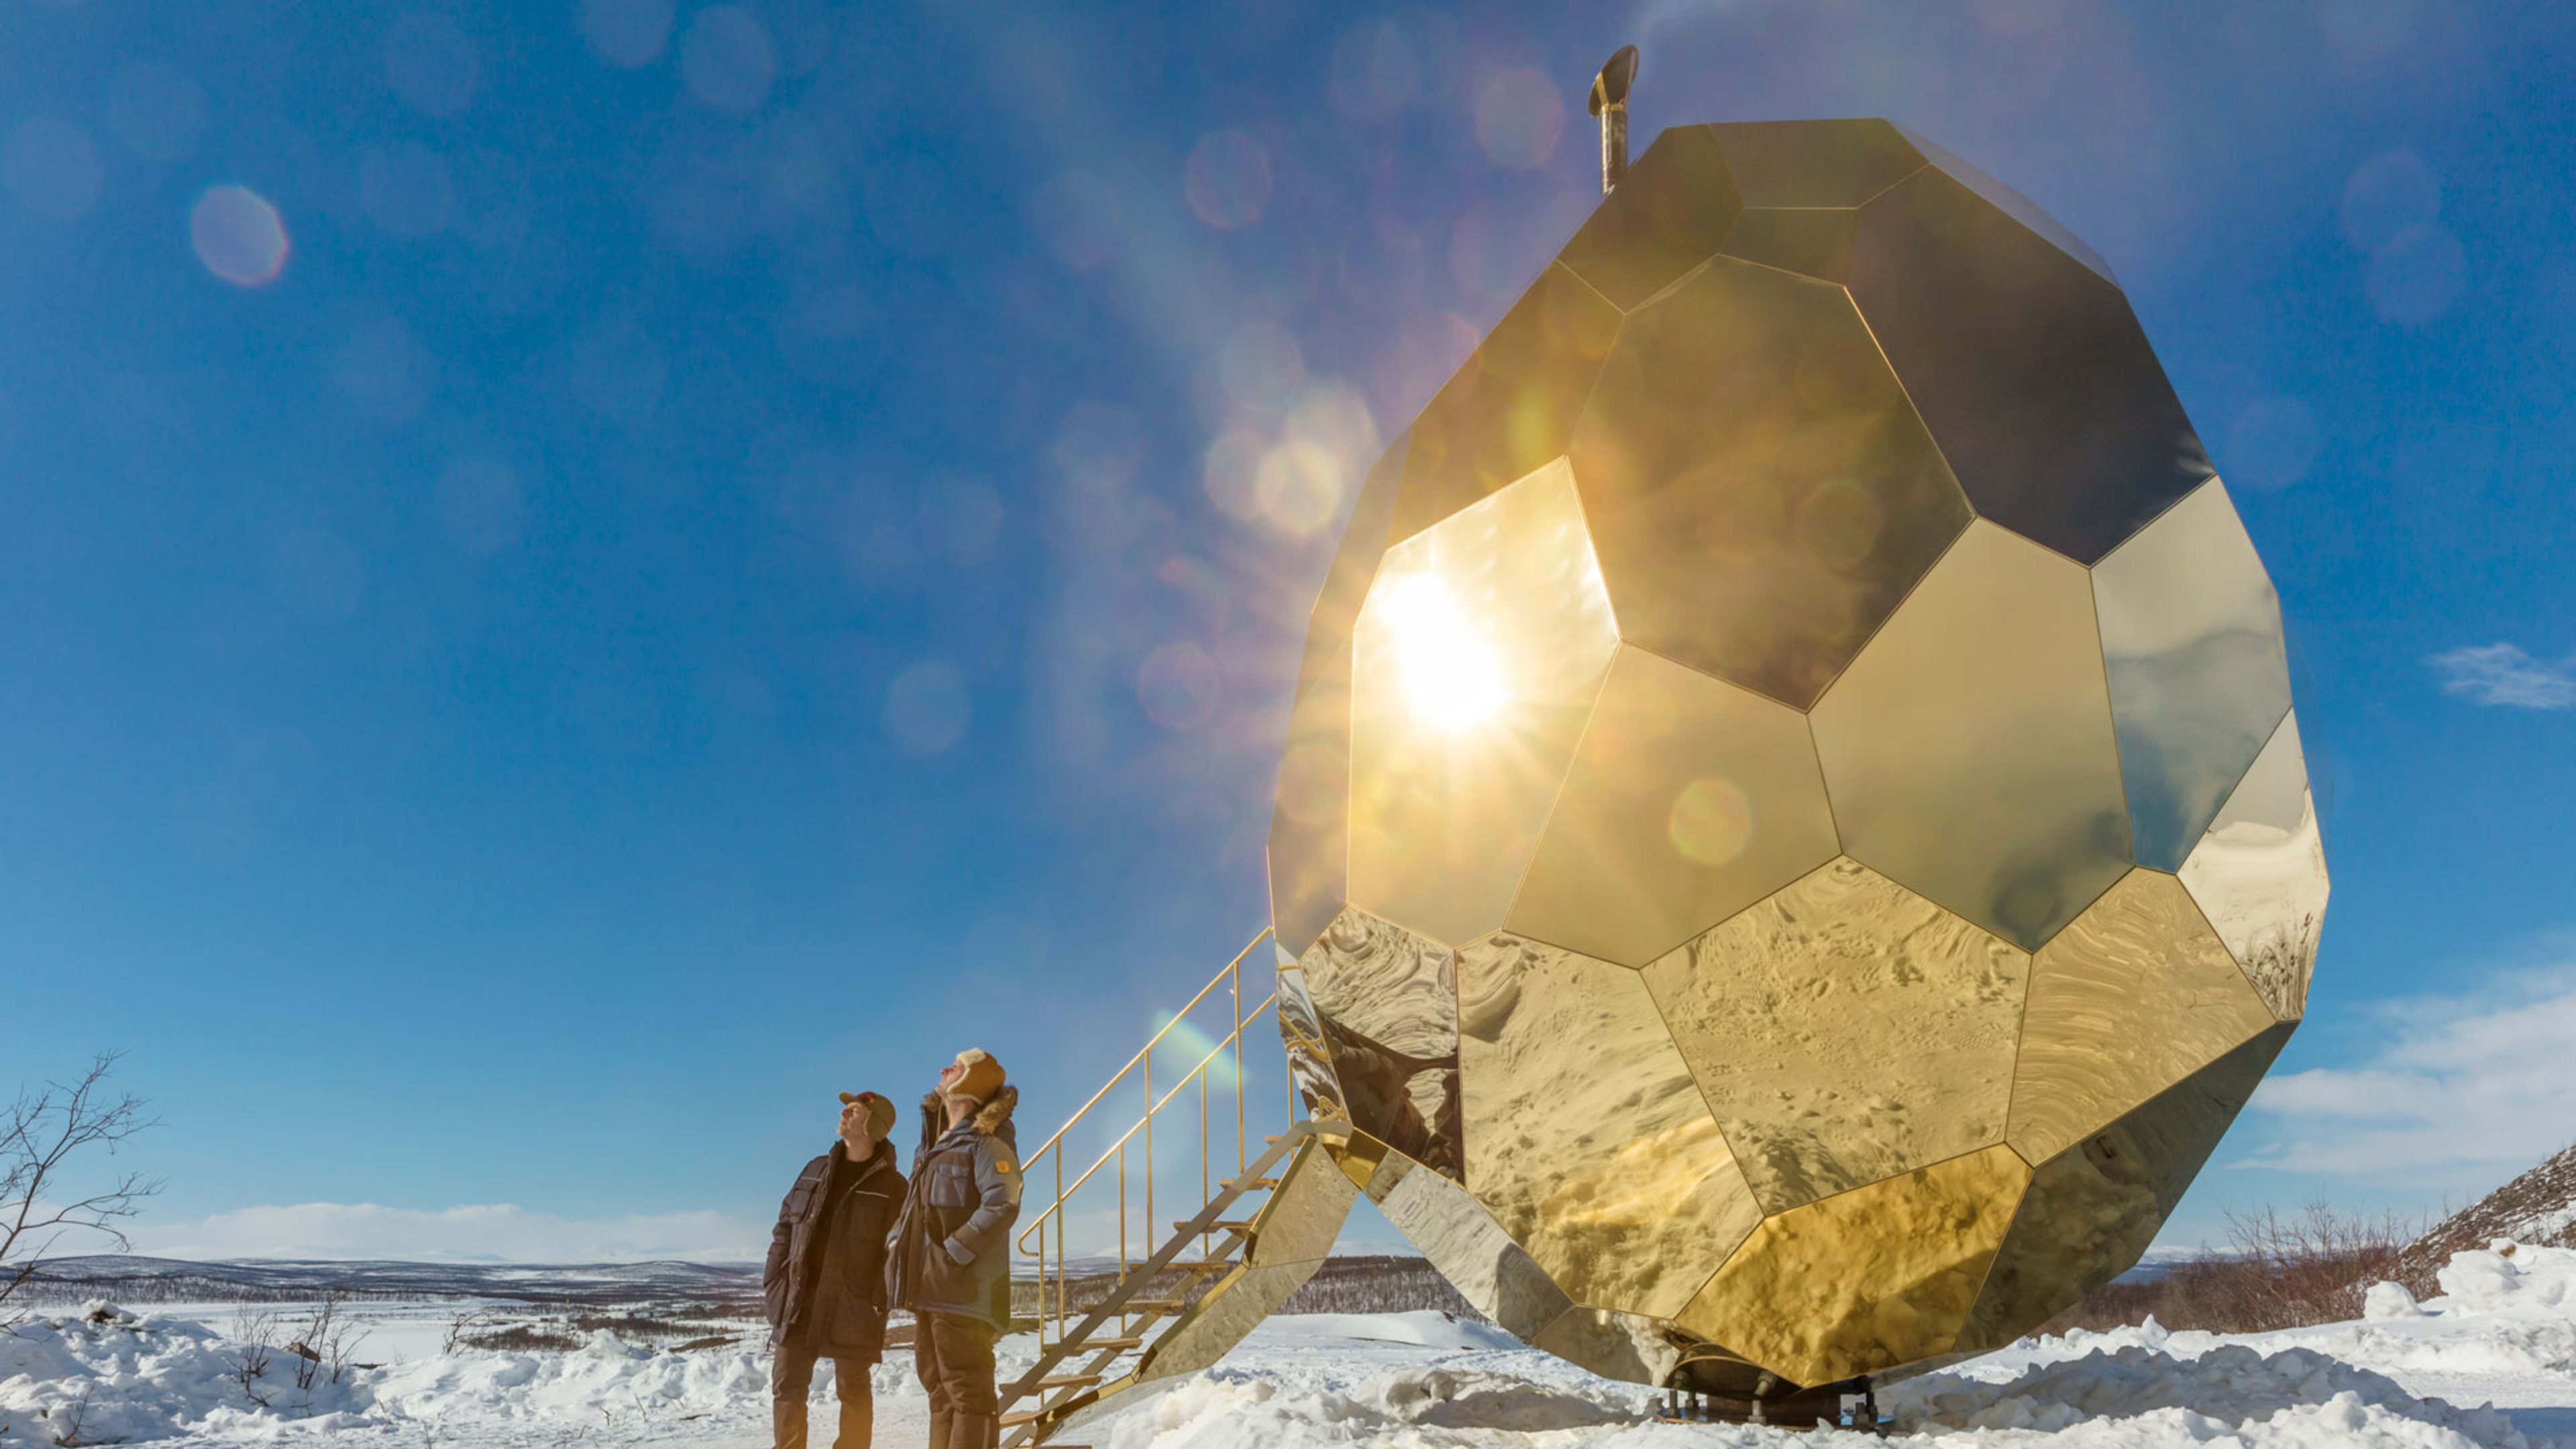 Now You Can Sauna In A Giant Golden Egg In Sweden’s Northernmost Town